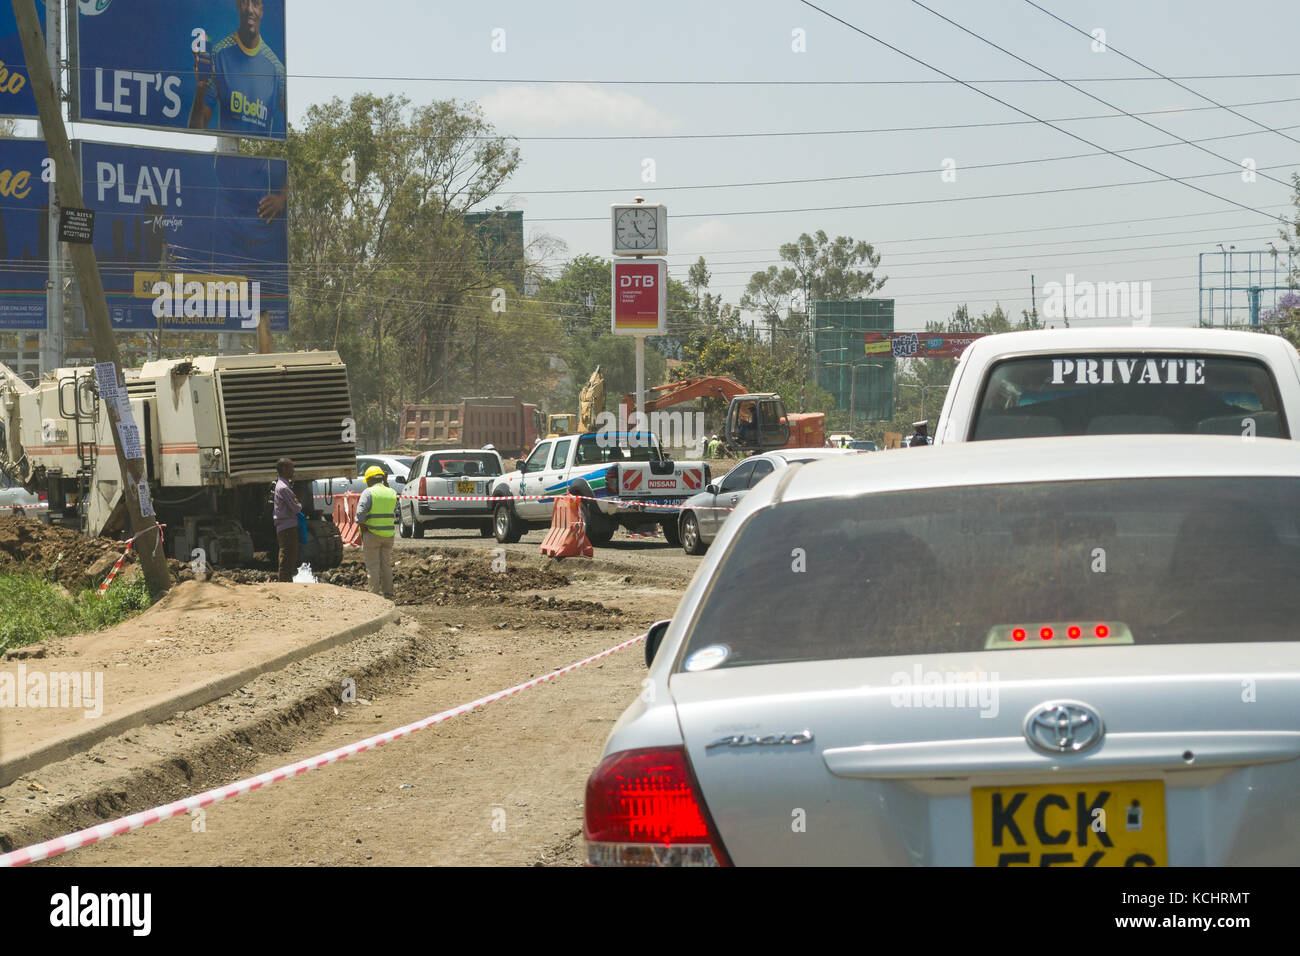 Vehicles stuck in traffic jam due to roadworks on Ngong Road into Nairobi Central Business District (CBD), Kenya Stock Photo